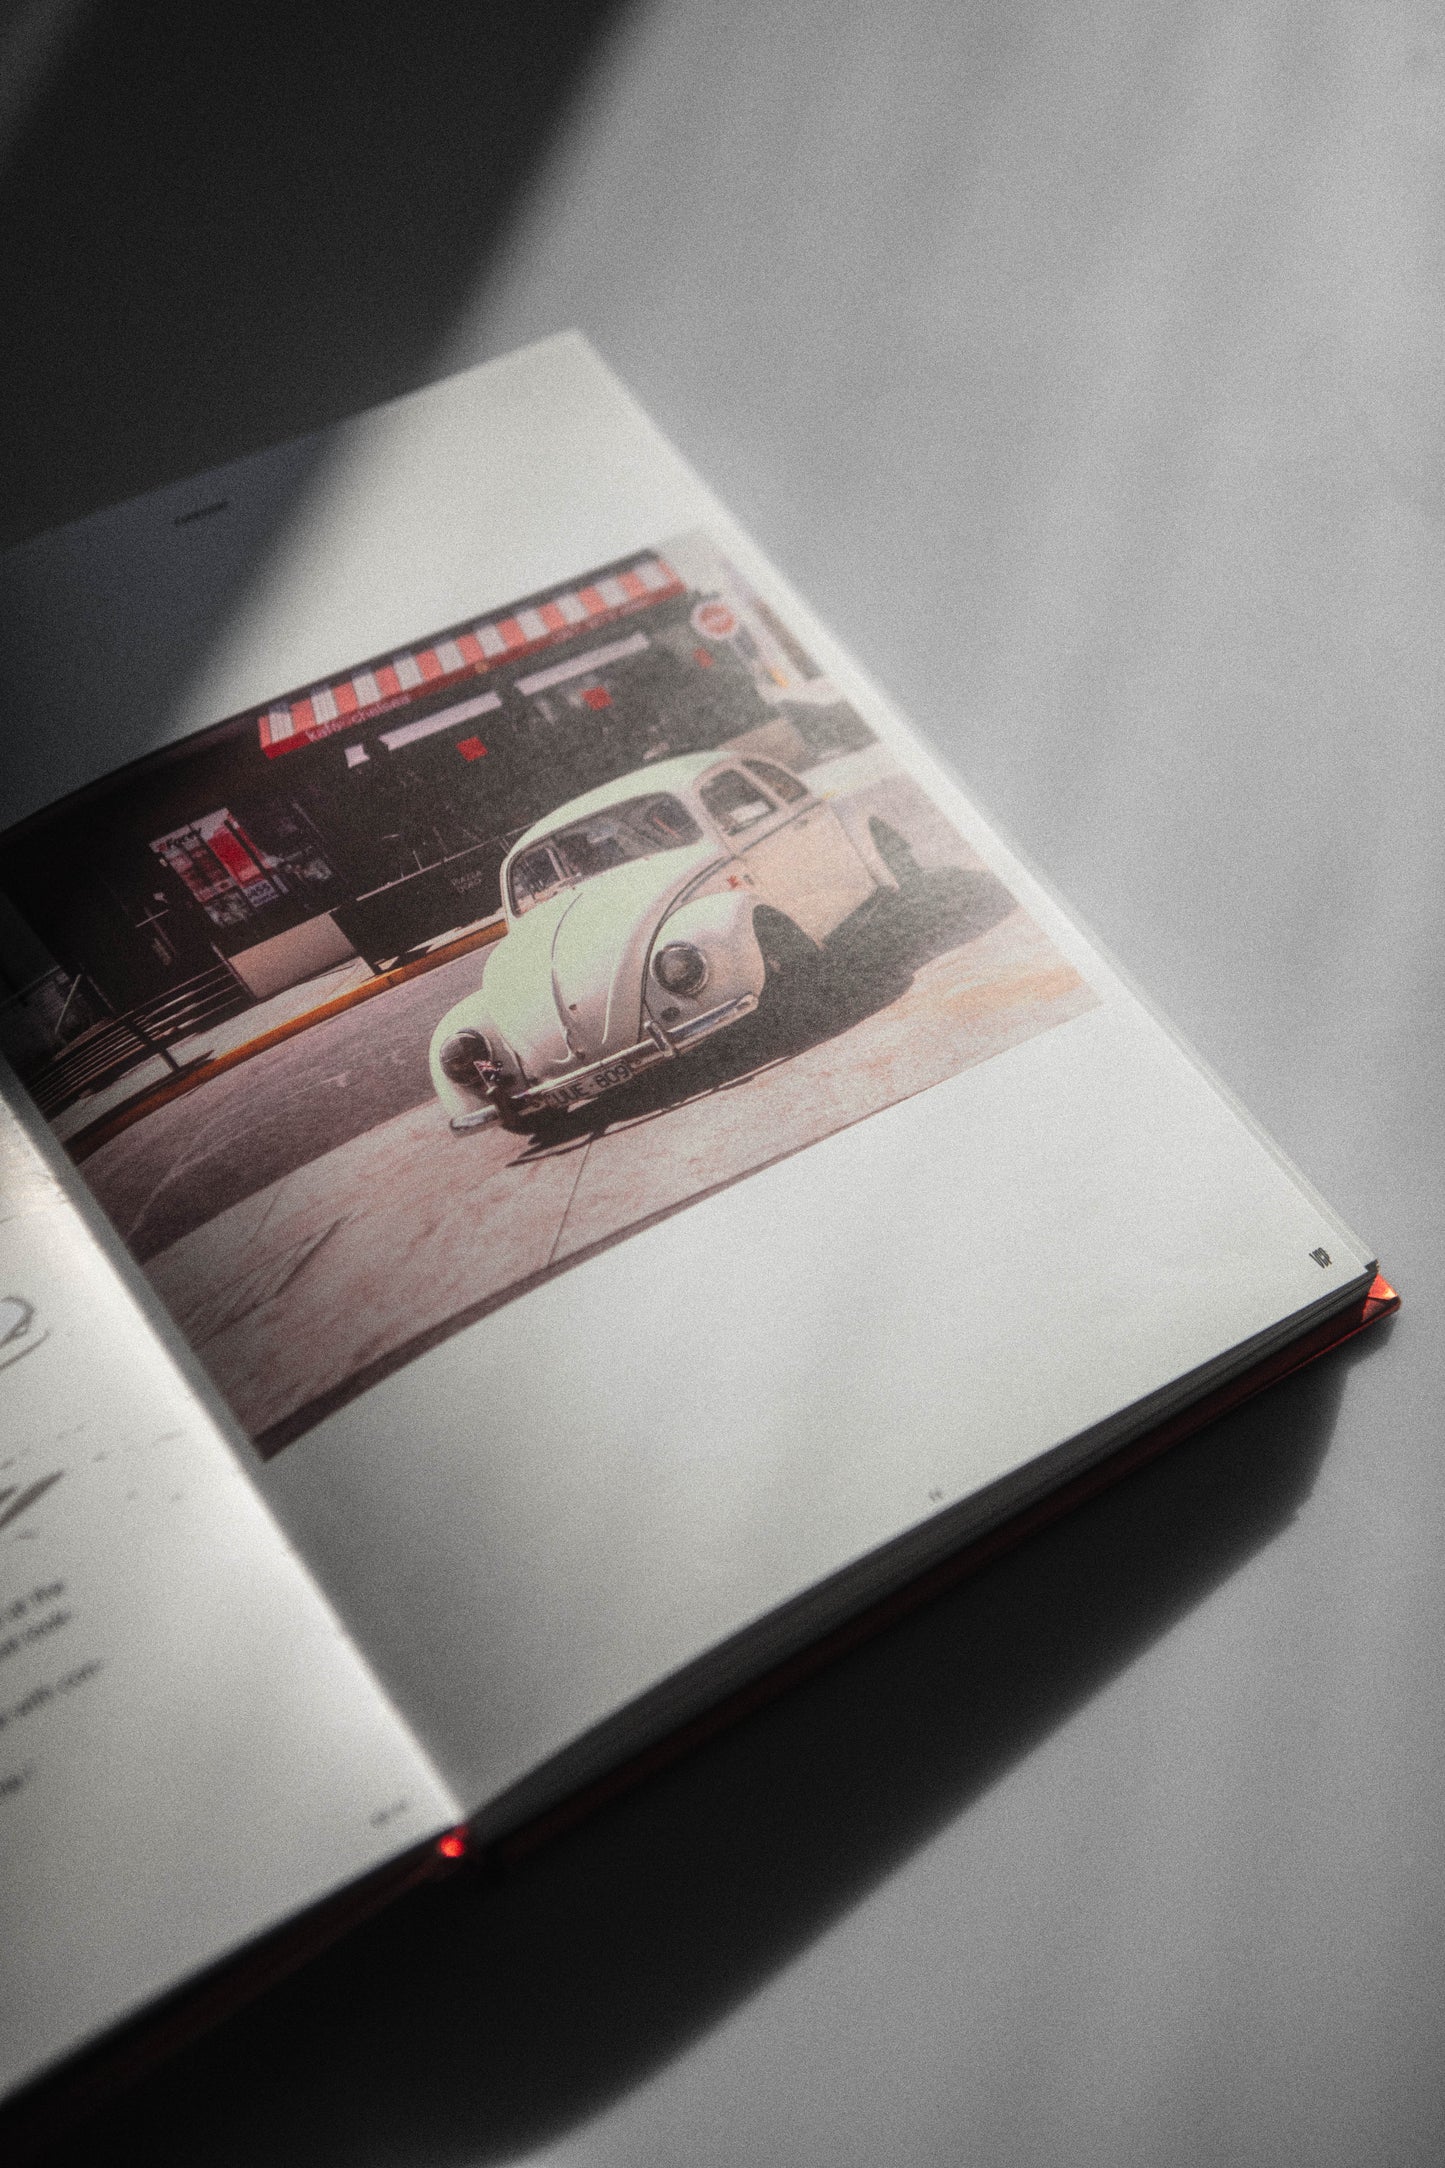 PRESALE - (UNBOXED) Vintage Car Porn Book Edition 01 (FREE SHIPPING)